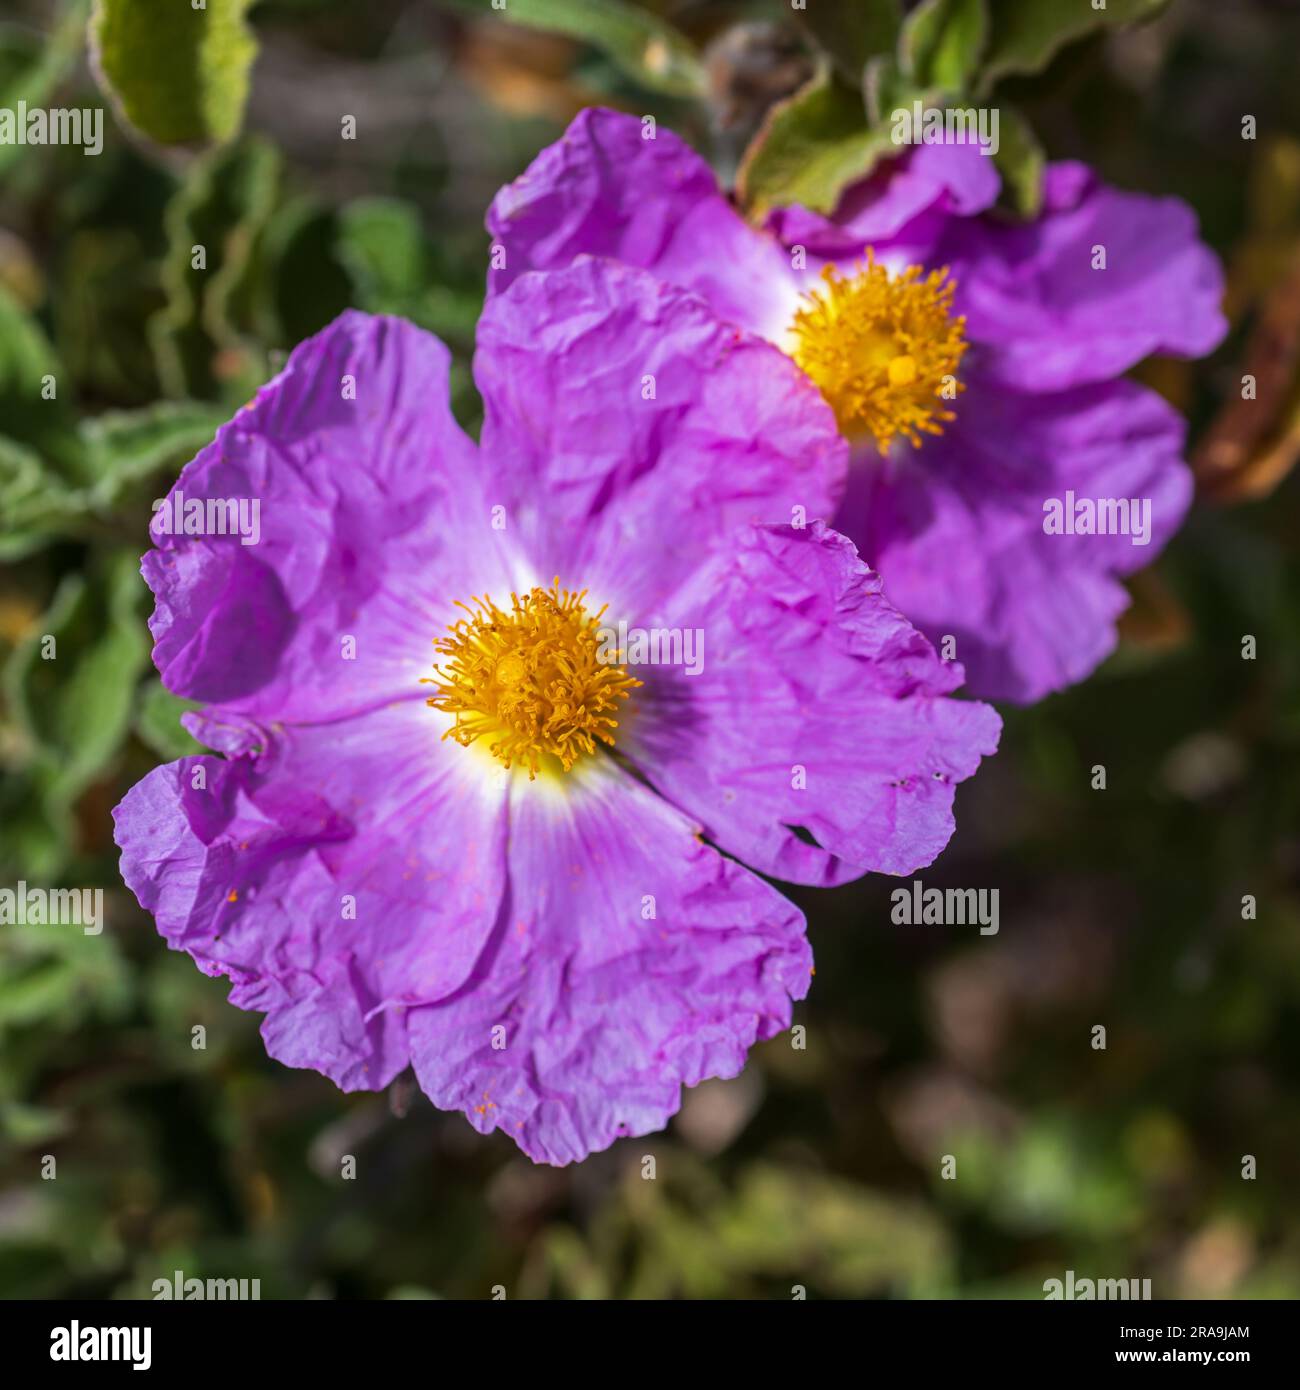 Cistus creticus is a species of shrubby plant in the family Cistaceae. Stock Photo